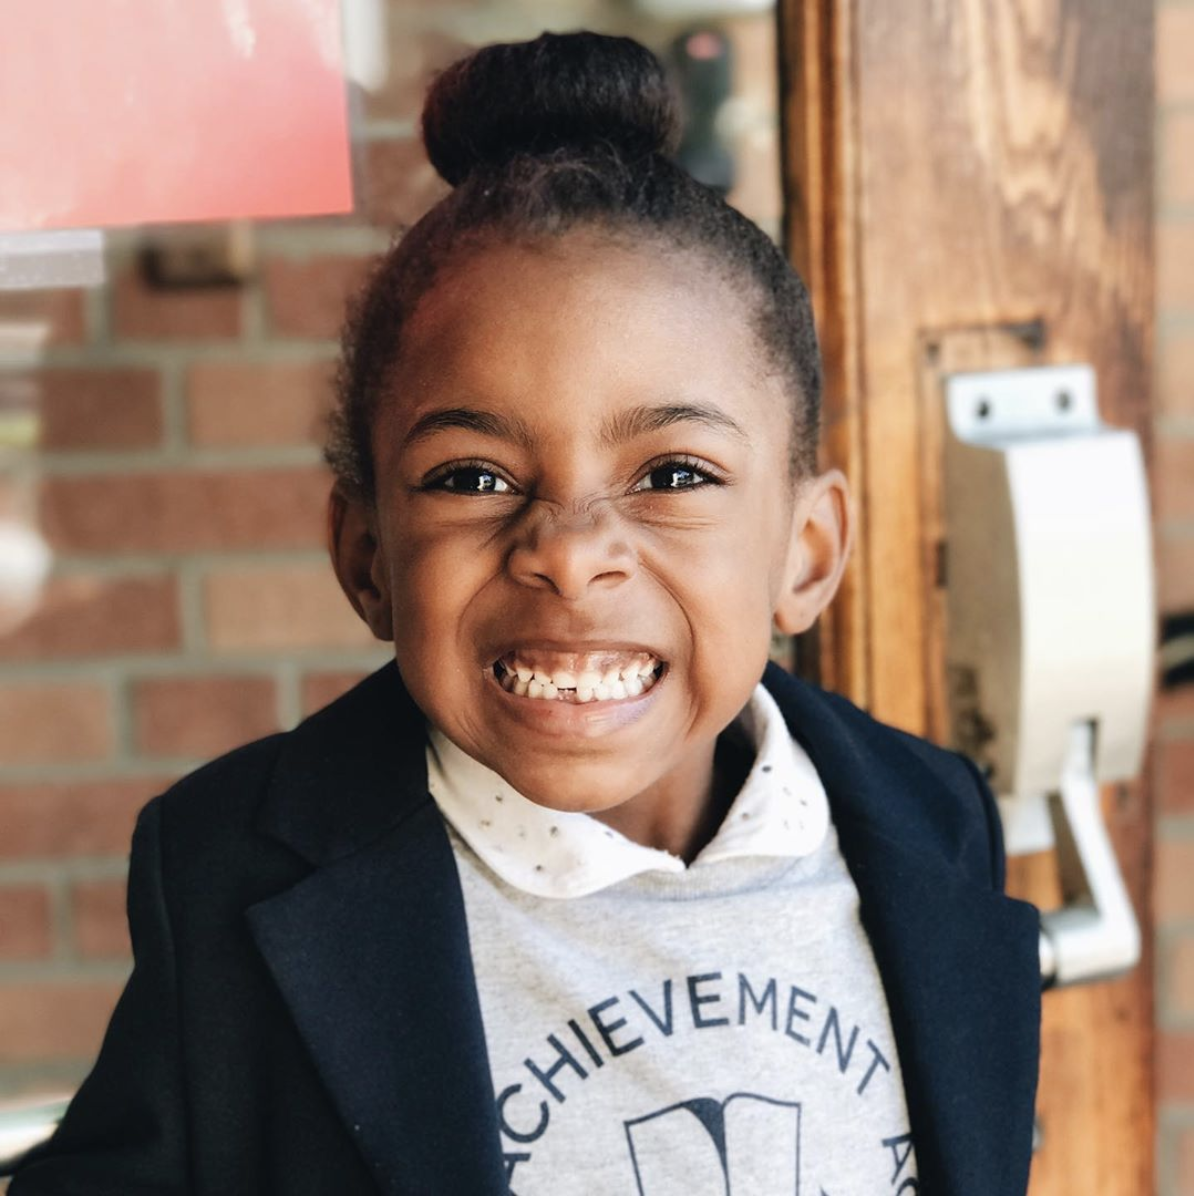 An African American student smiles at the camera while wearing a Detroit Achievement Academy shirt and blazer.